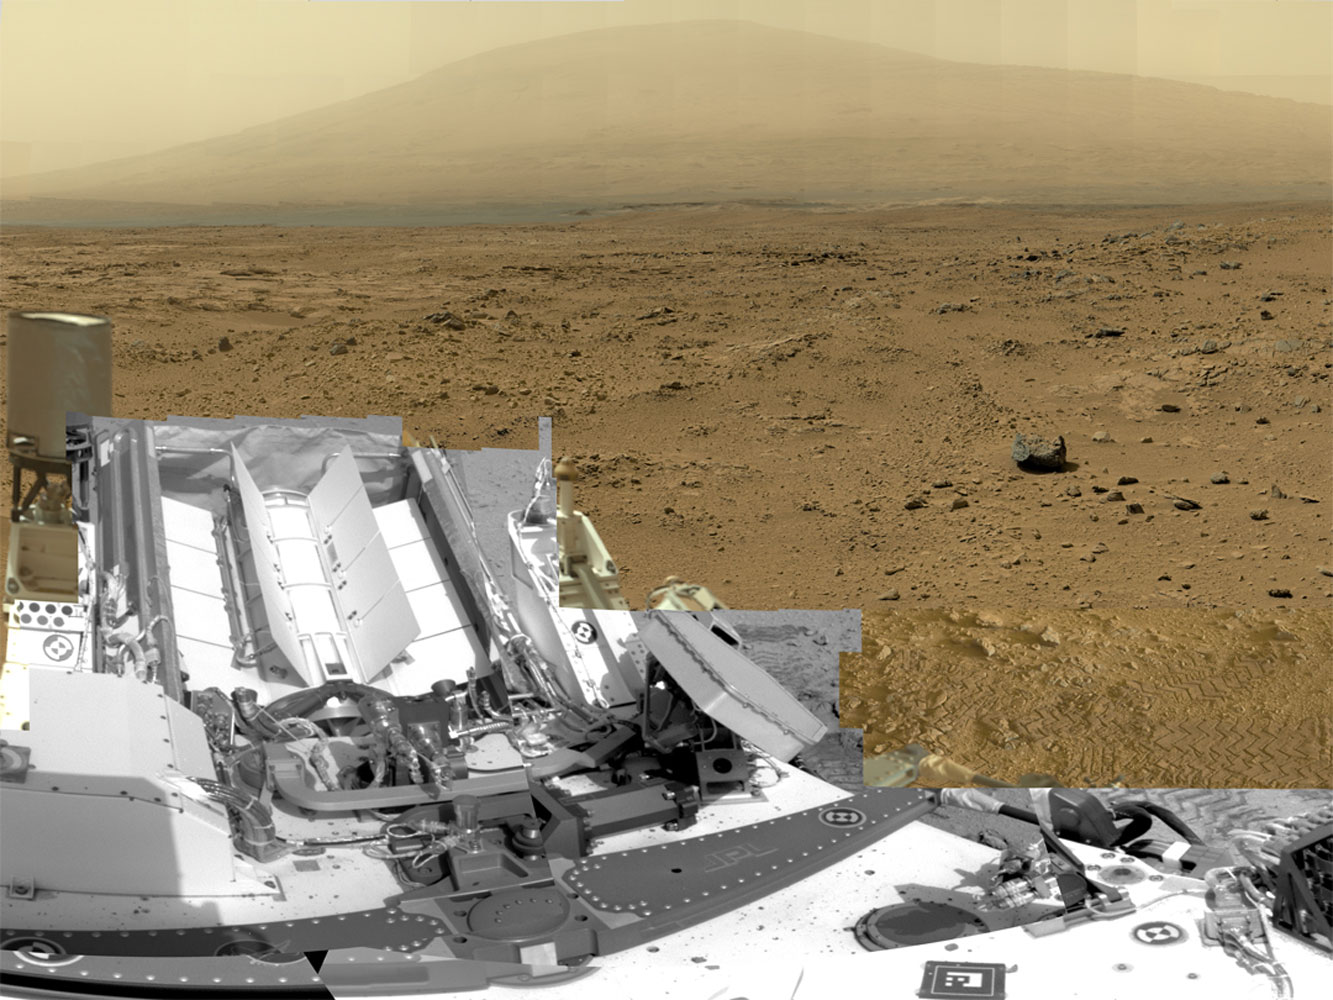 A full-circle view released by NASA on June 20, 2013, combined nearly 900 images taken by NASA's Curiosity Mars rover, generating a panorama with 1.3 billion pixels in the full-resolution version. The view is centered toward the south, with north at both ends. It shows NASA's Mars rover Curiosity at the 'Rocknest' site where the rover scooped up samples of windblown dust and sand.